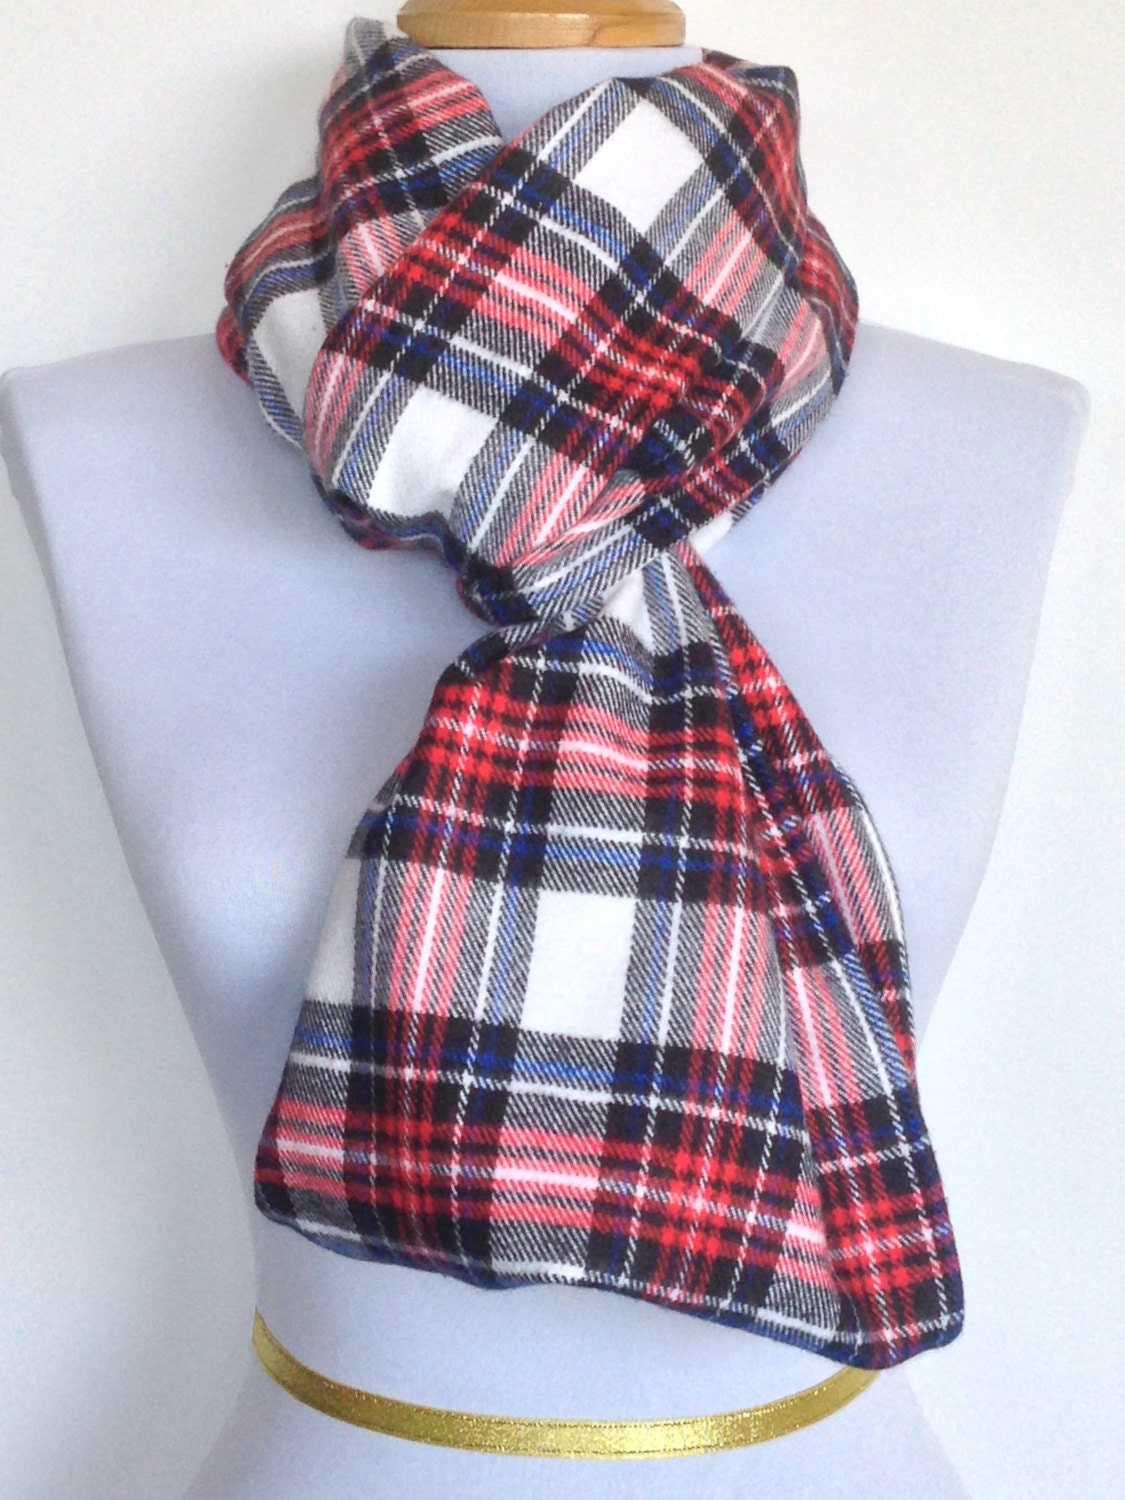 Infinity Scarf in Red White Blue and Black Tartan Plaid